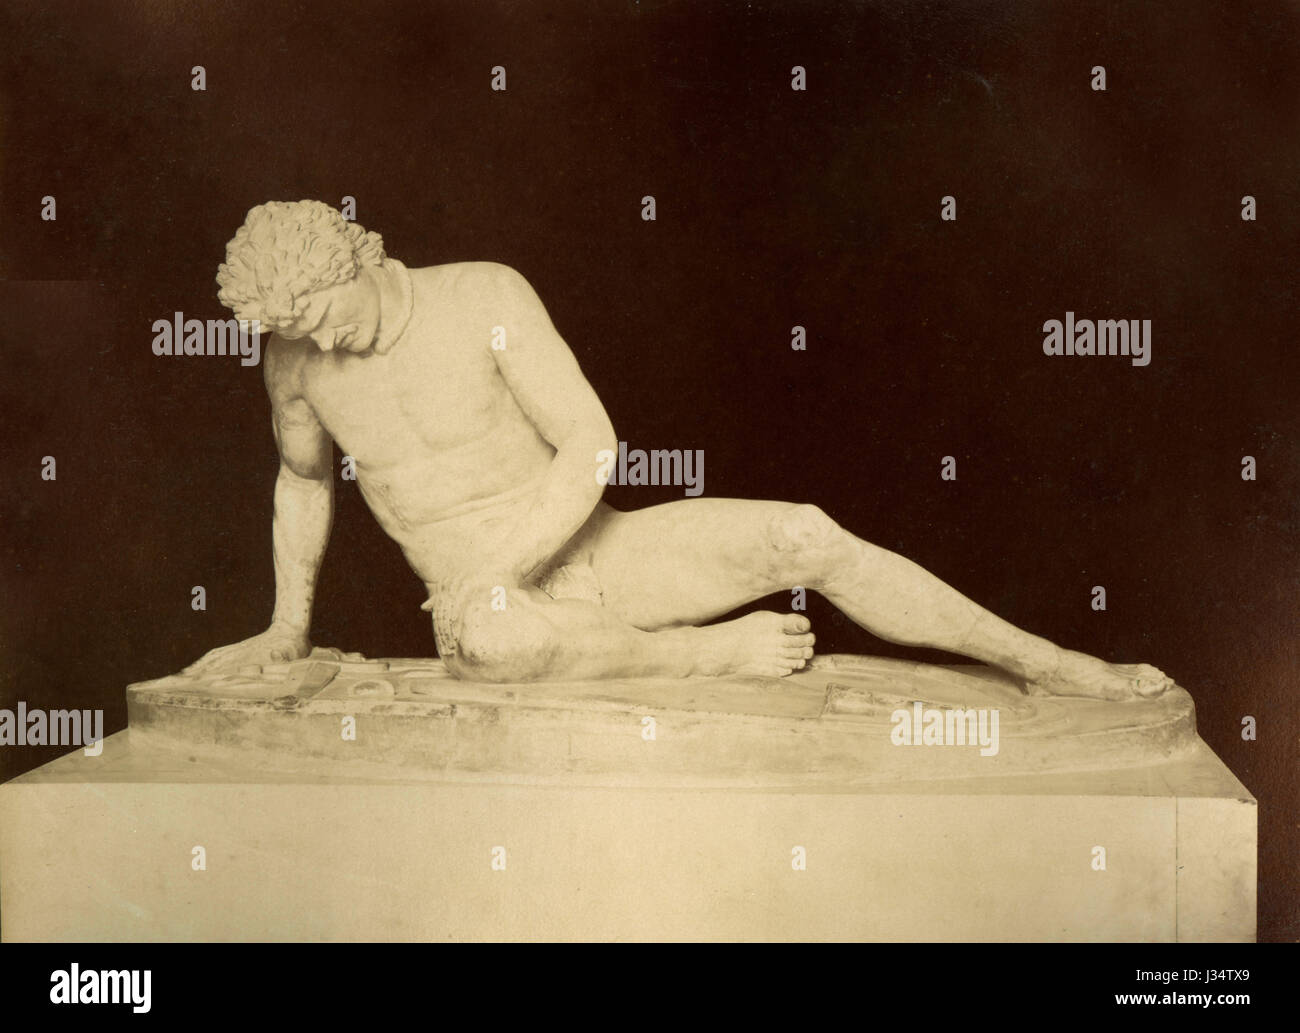 Dying Gaul, sculpture, Rome, Italie Banque D'Images